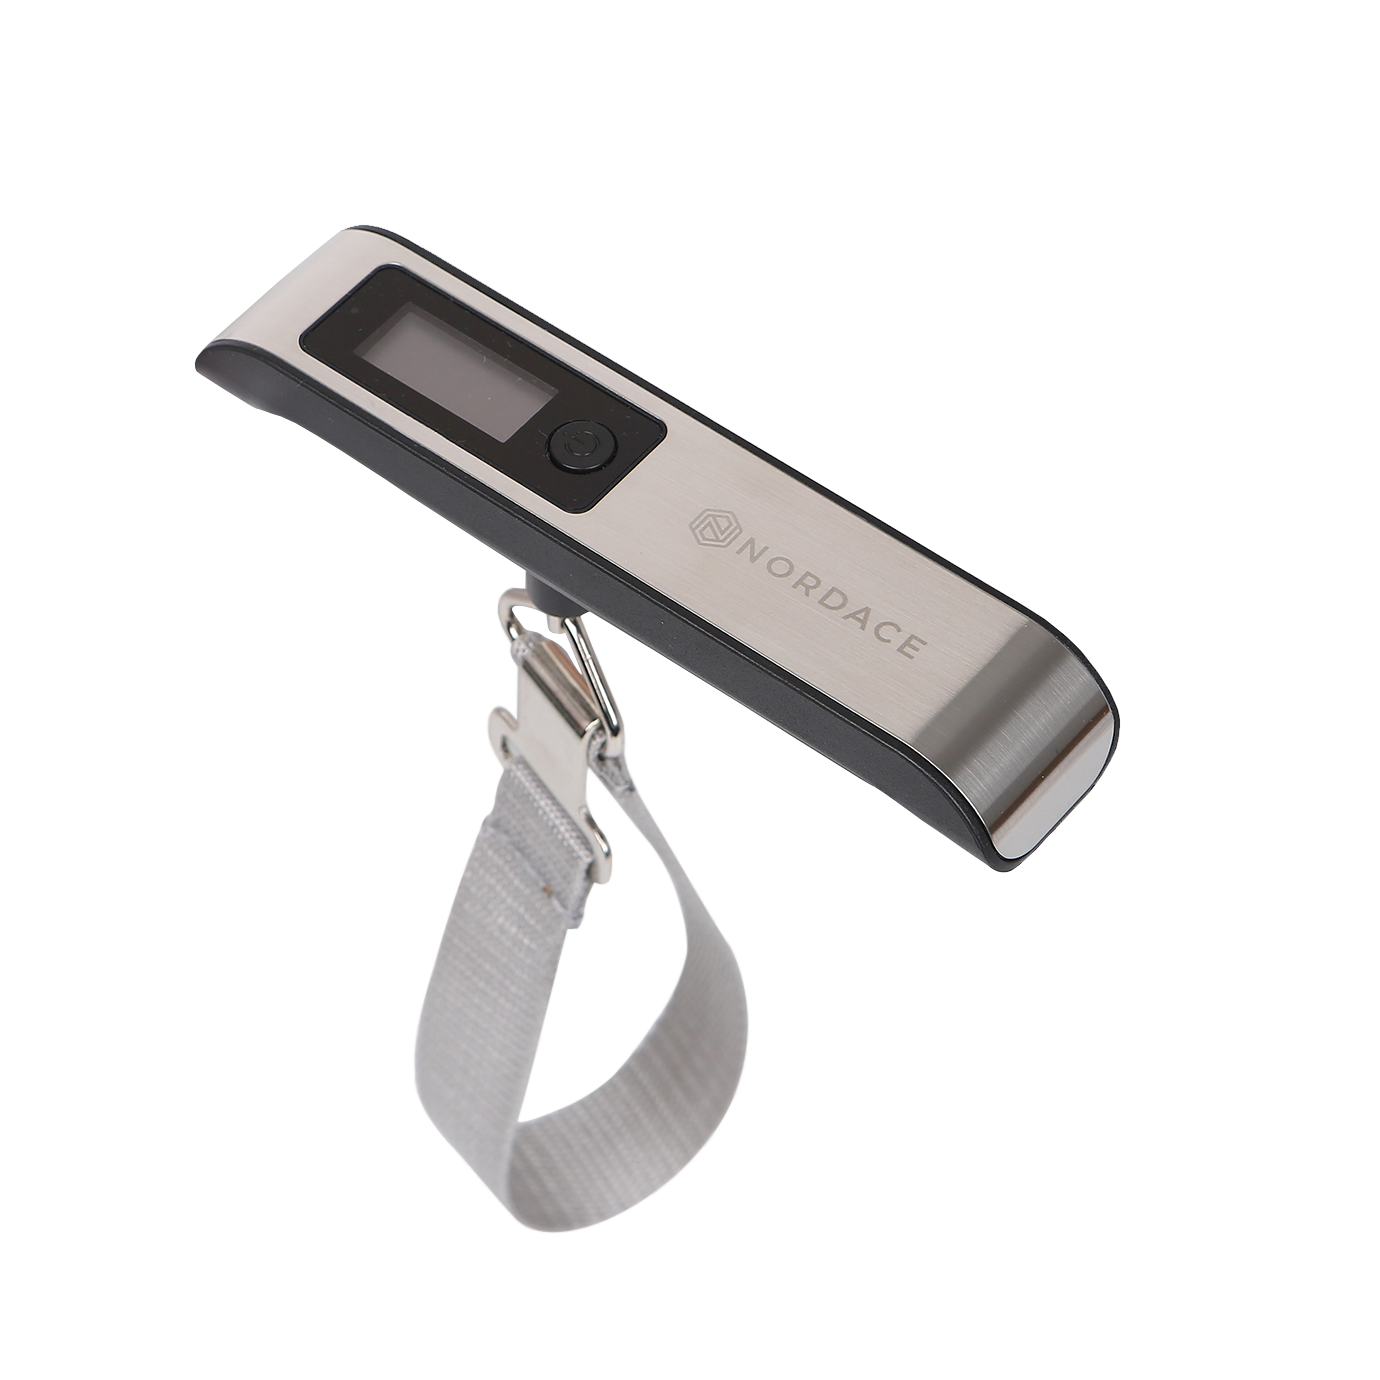 Nordace Luggage Scale